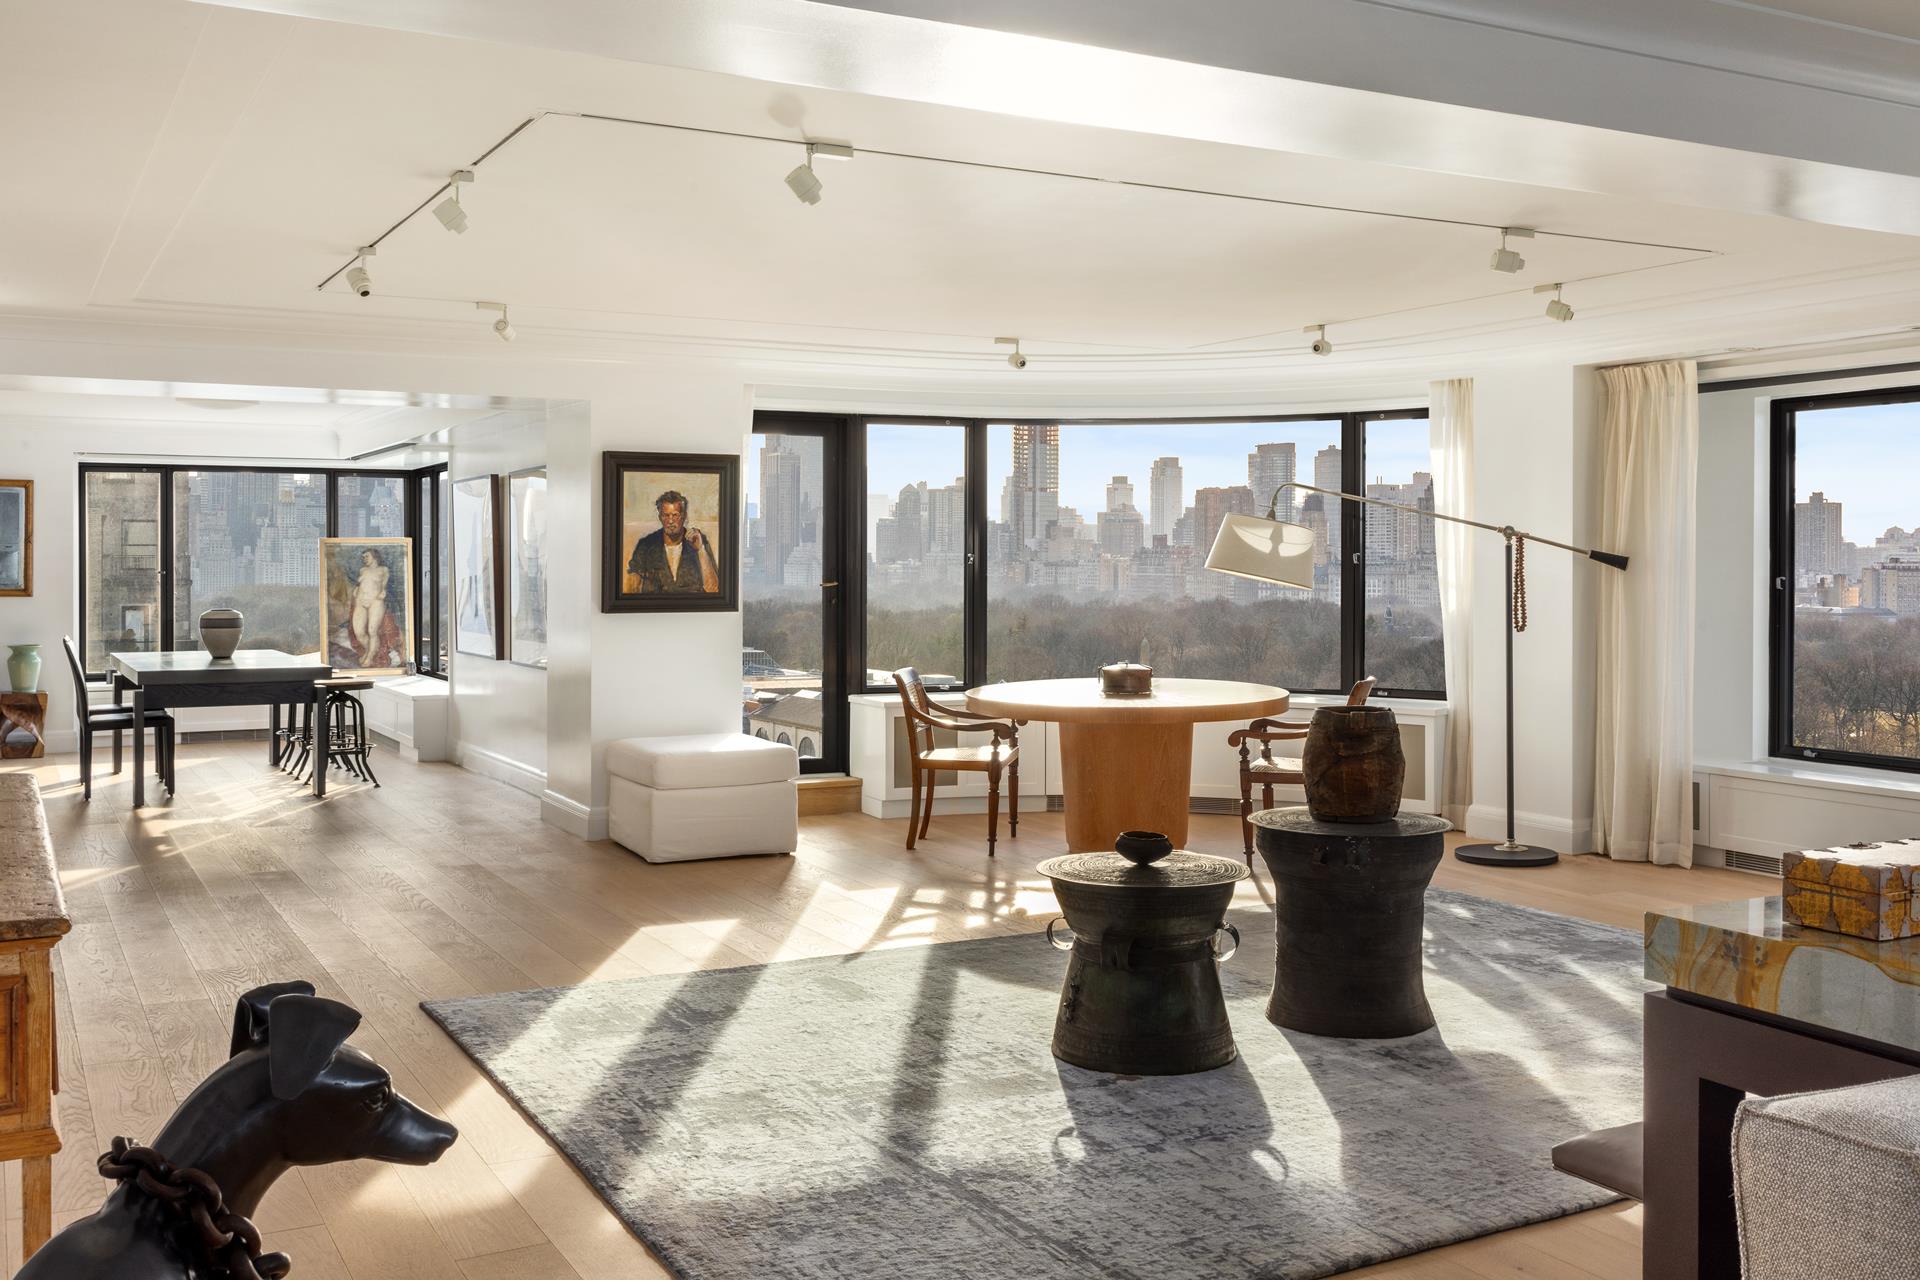 1050 5th Avenue 19B/19C, Carnegie Hill, Upper East Side, NYC - 3 Bedrooms  
4.5 Bathrooms  
8 Rooms - 